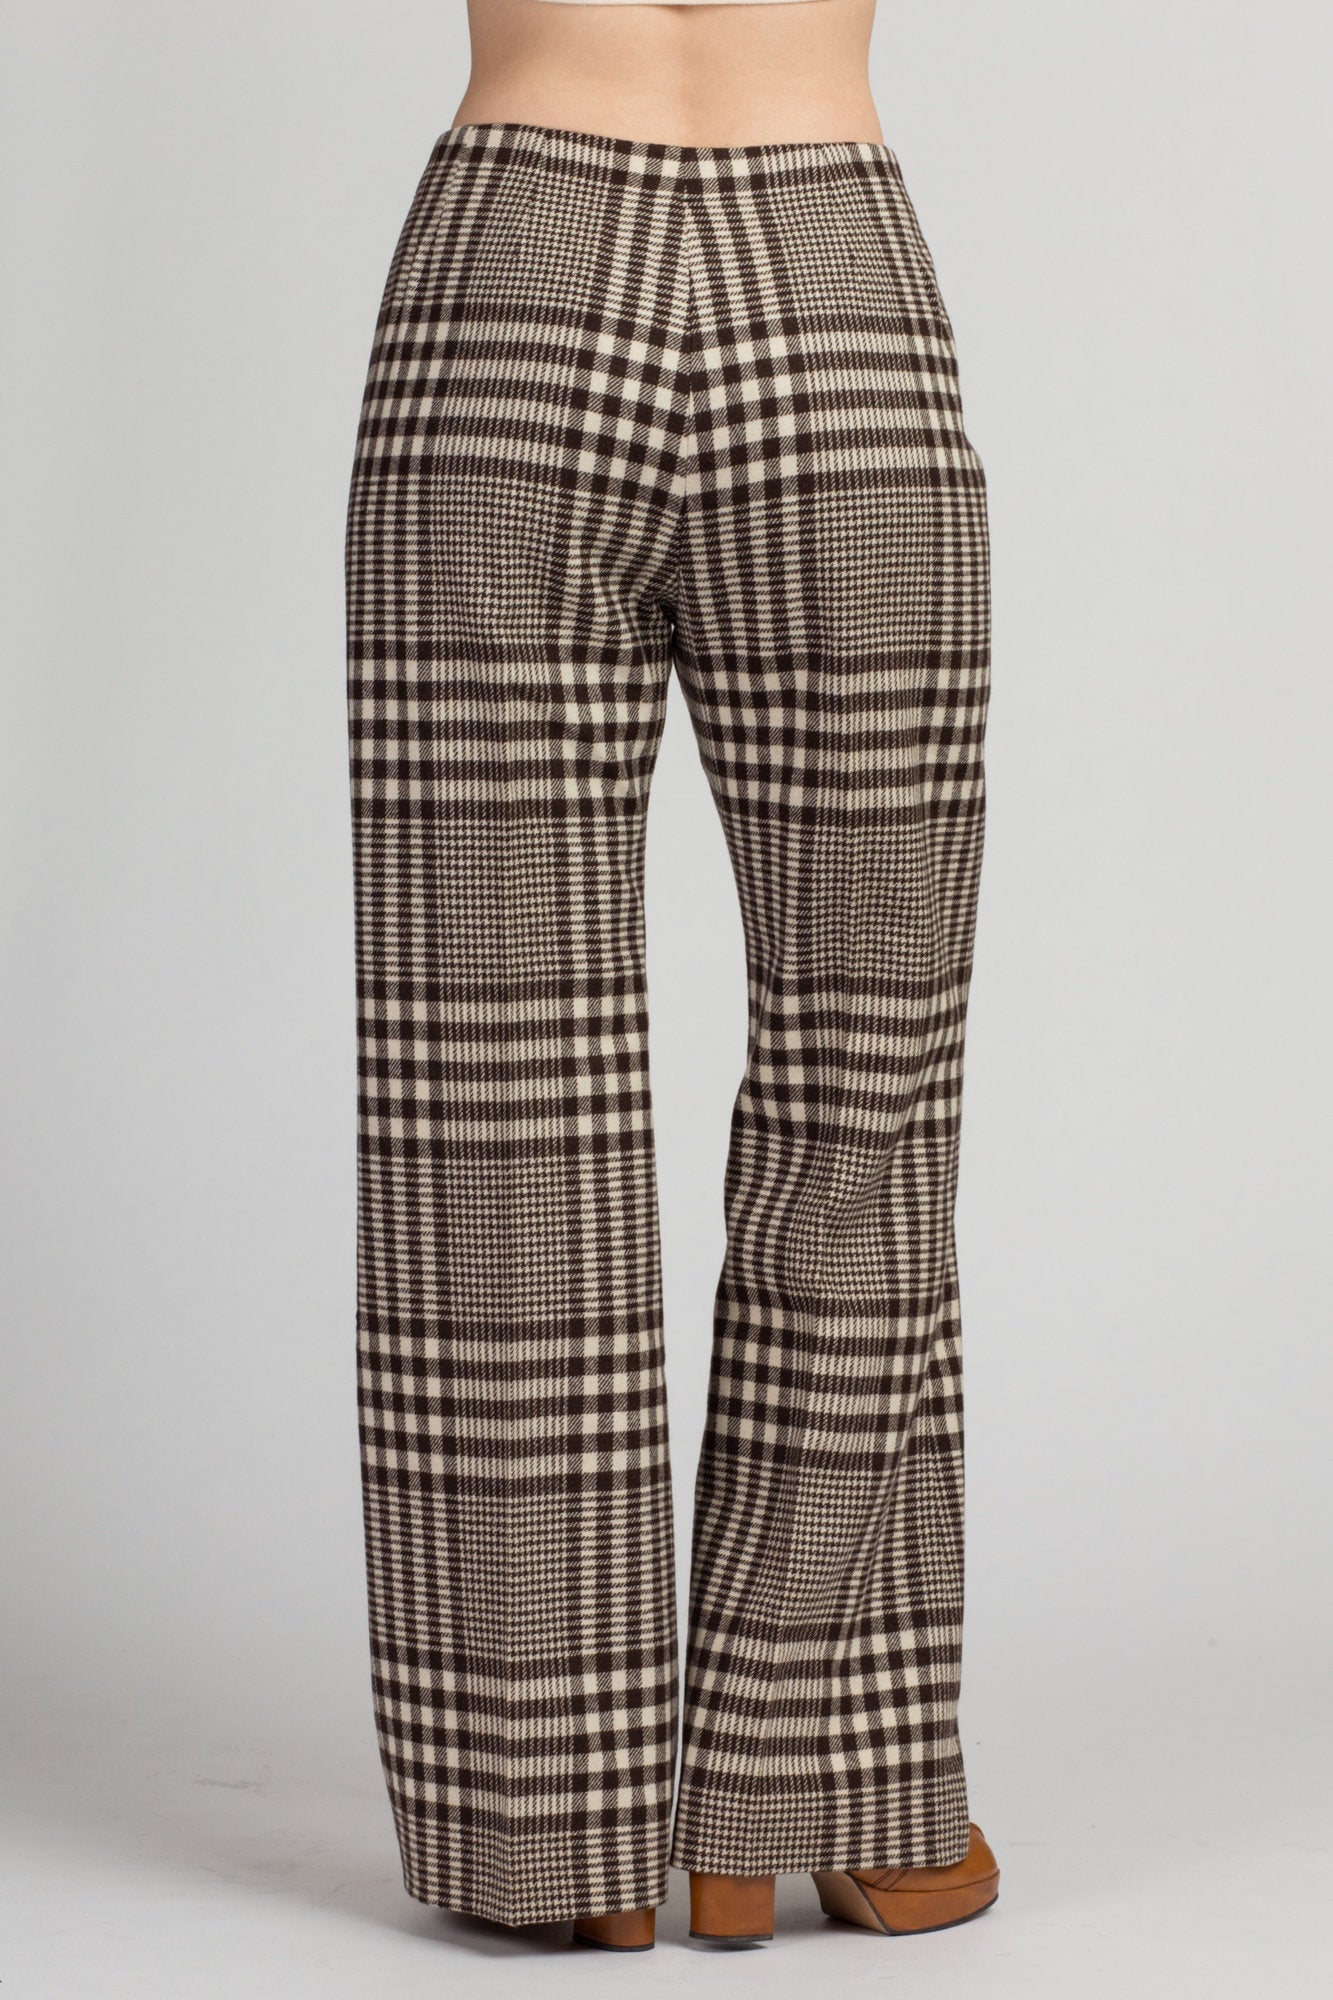 Burberry 4 Pockets Tartan Pants with Belt Loops women - Glamood Outlet